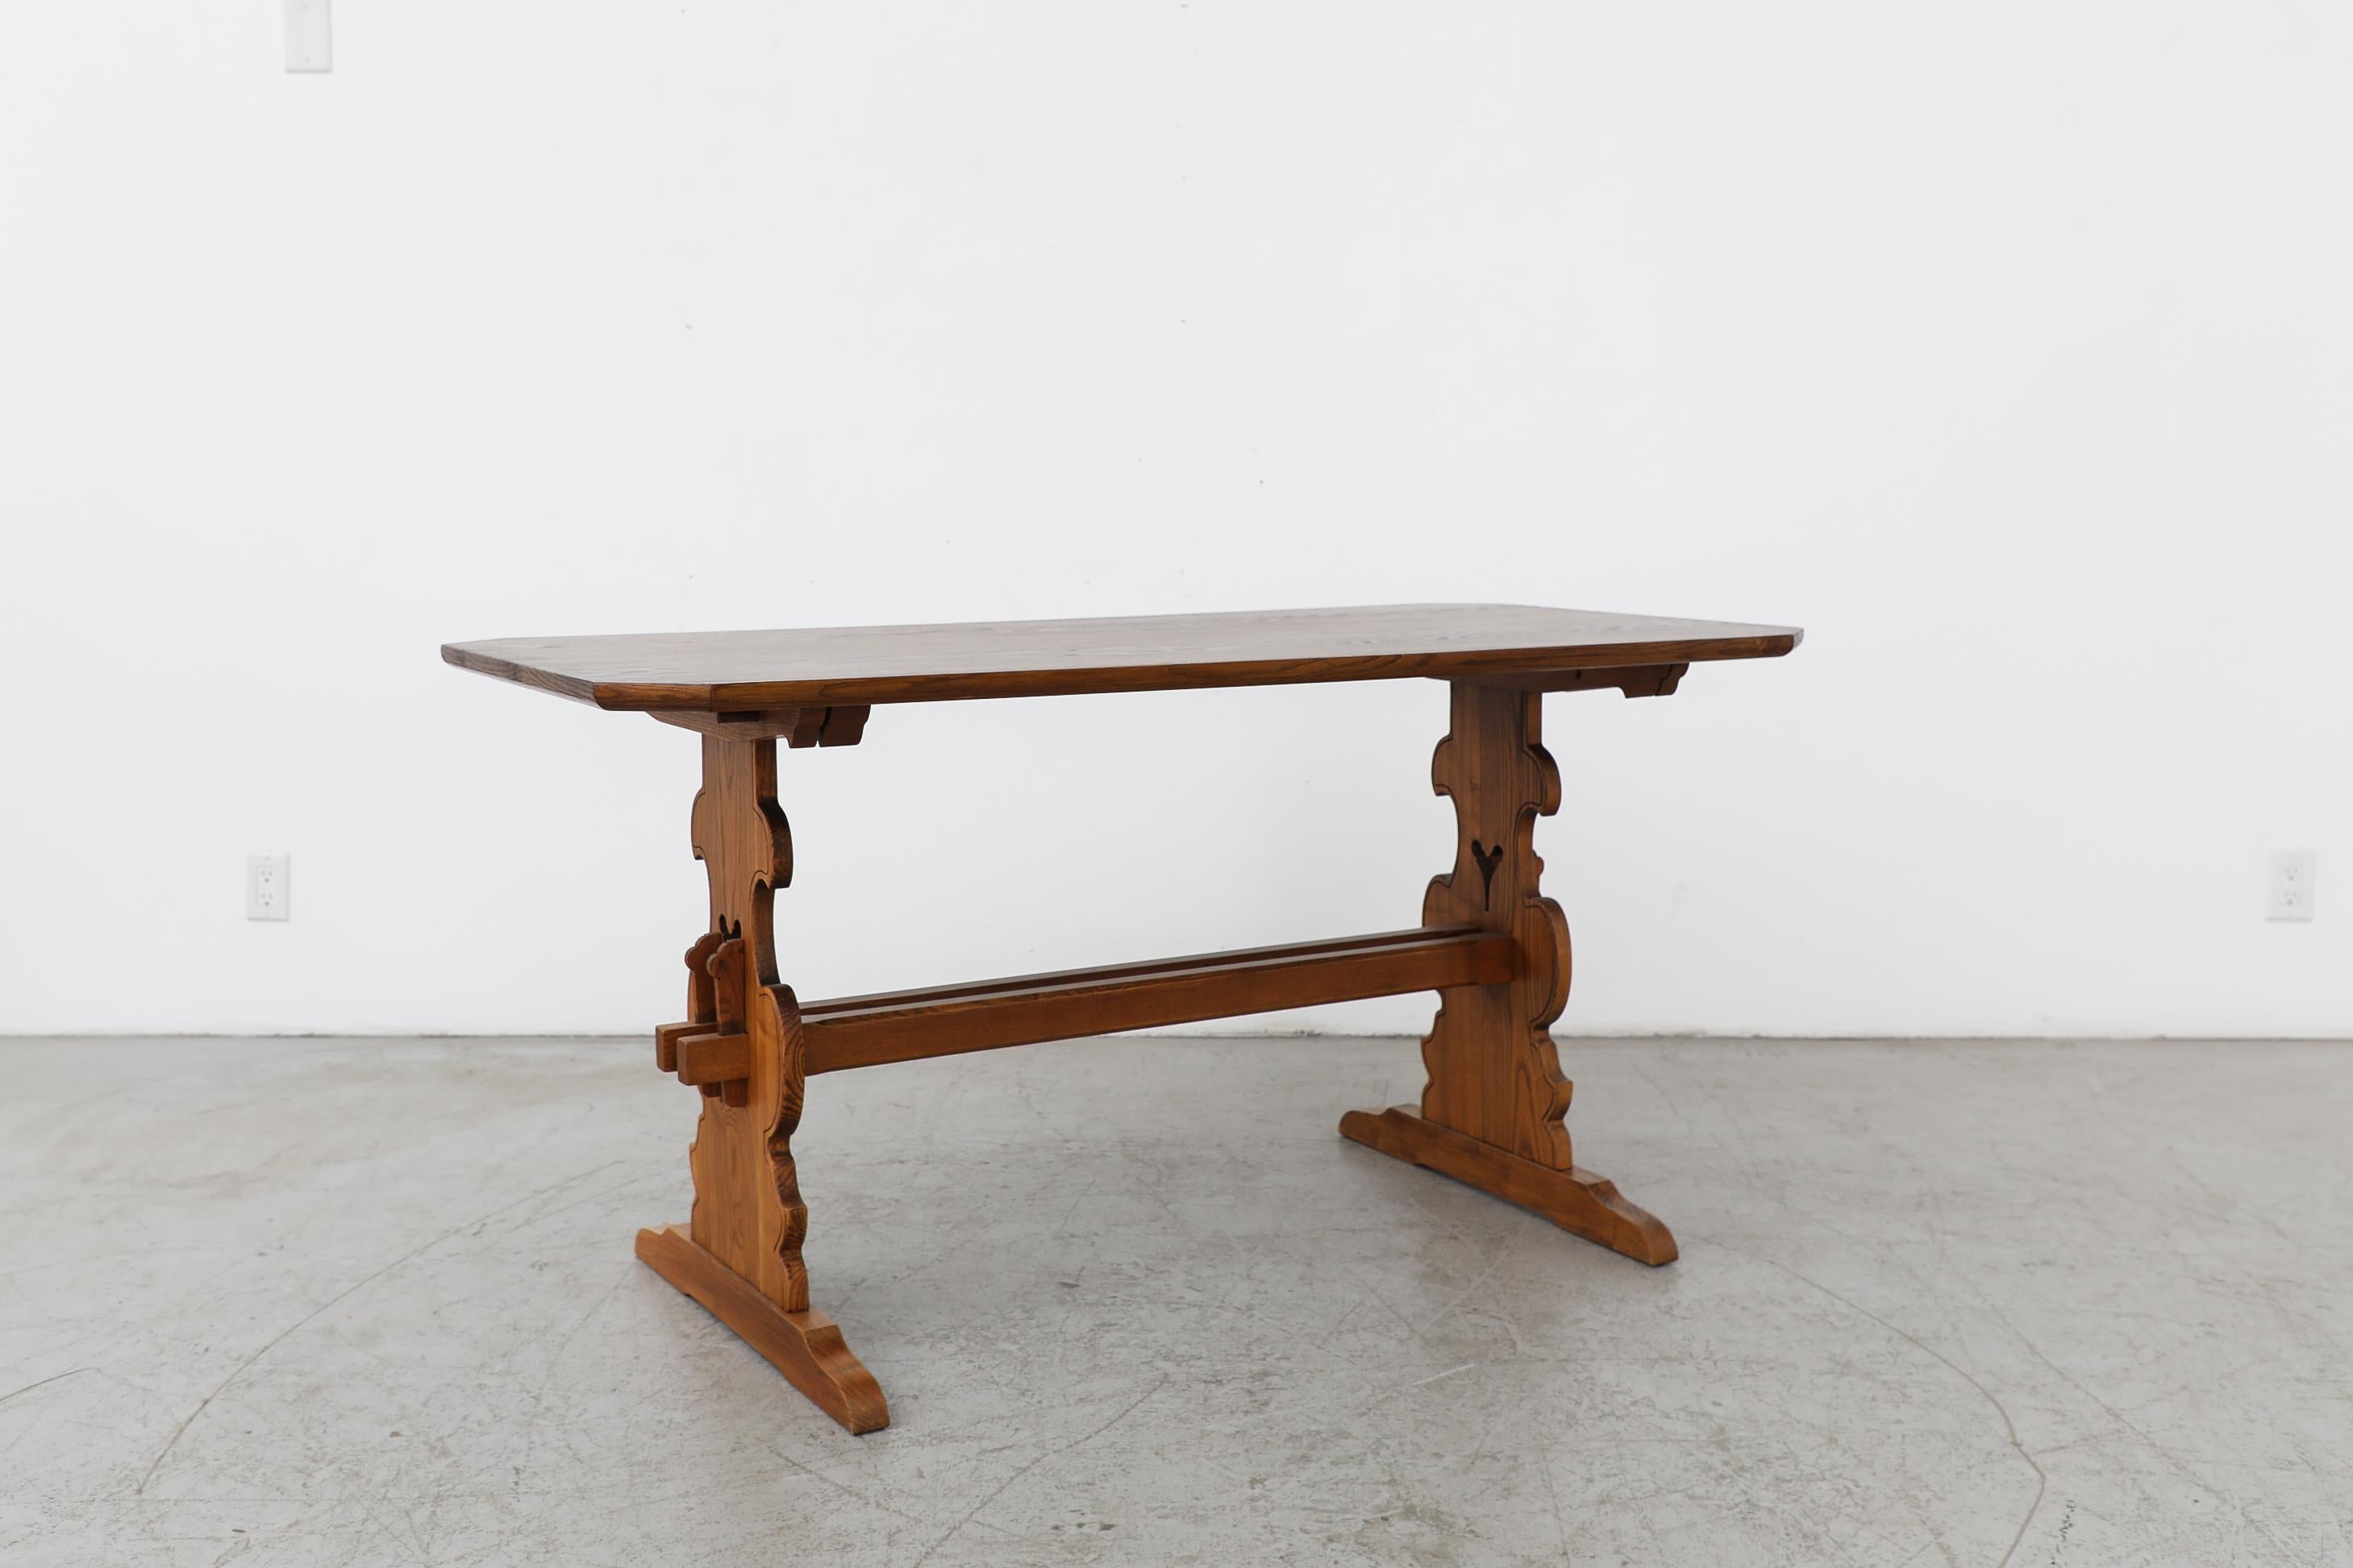 Mid-20th Century Austrian Ornate Brutalist Tyrolean Style Dark Pine Table with Angled Corners For Sale